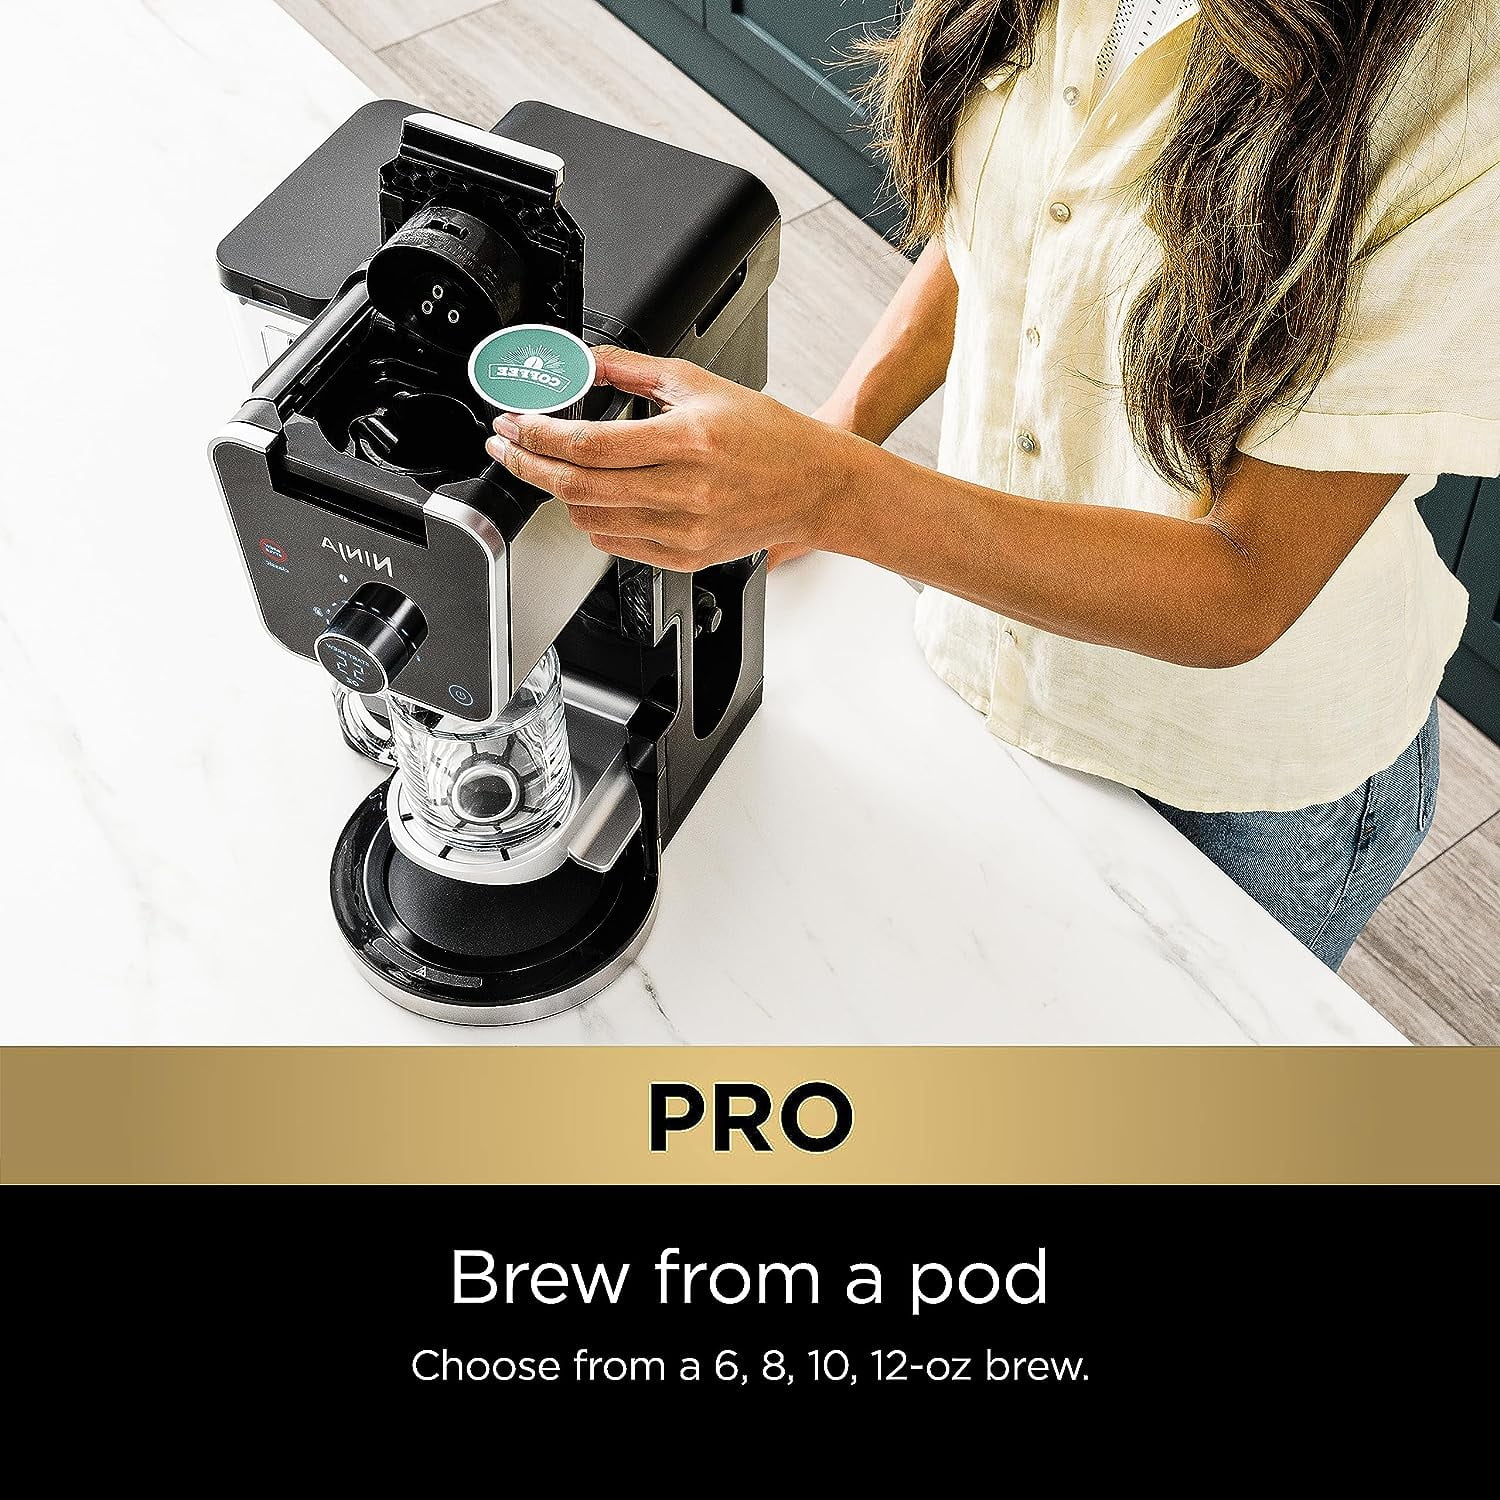 Ninja CFP301 DualBrew Pro Specialty 12-Cup Drip Maker with Glass Carafe,  Single-Serve Grounds, compatible with K-Cup pods, with 4 Brew Styles,  Frother & Separat…